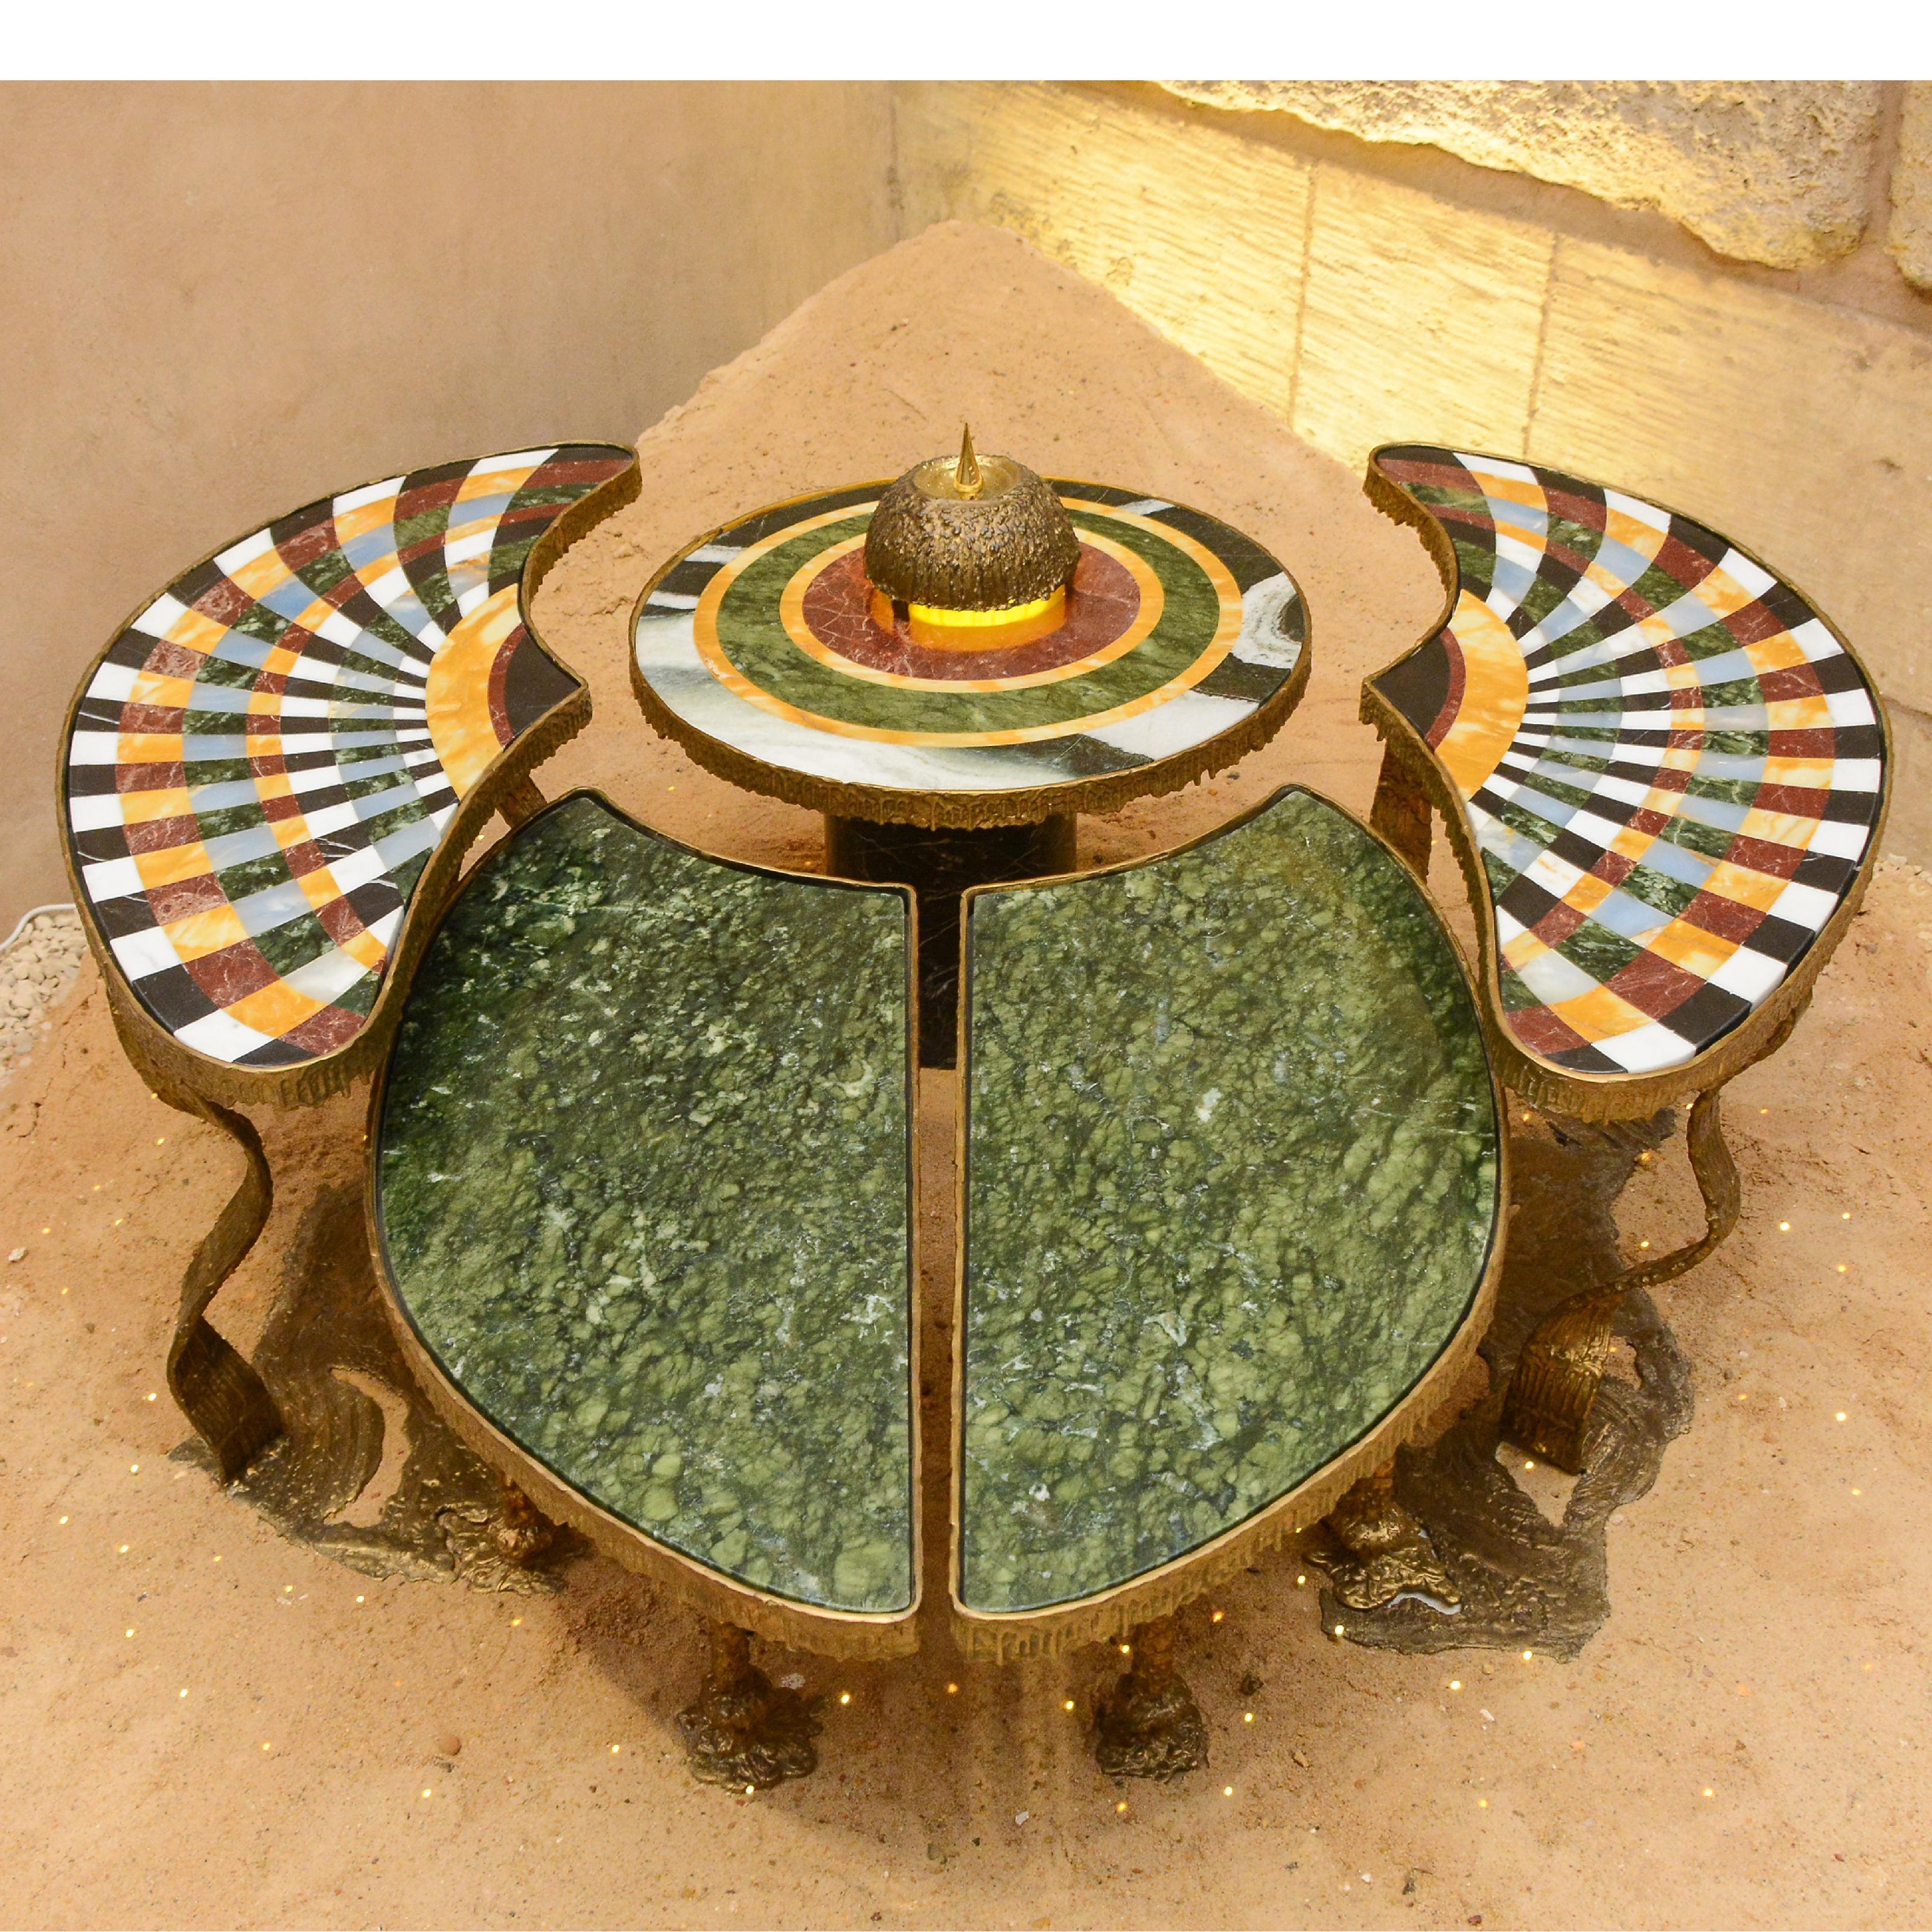 The scarab table is a captivating masterpiece that blends symbolism and design, inspired by the ancient Egyptian scarab. Intricate legs depict the scarab beetle's transformative journey, while delicate wings -that look like the lotus-symbolize